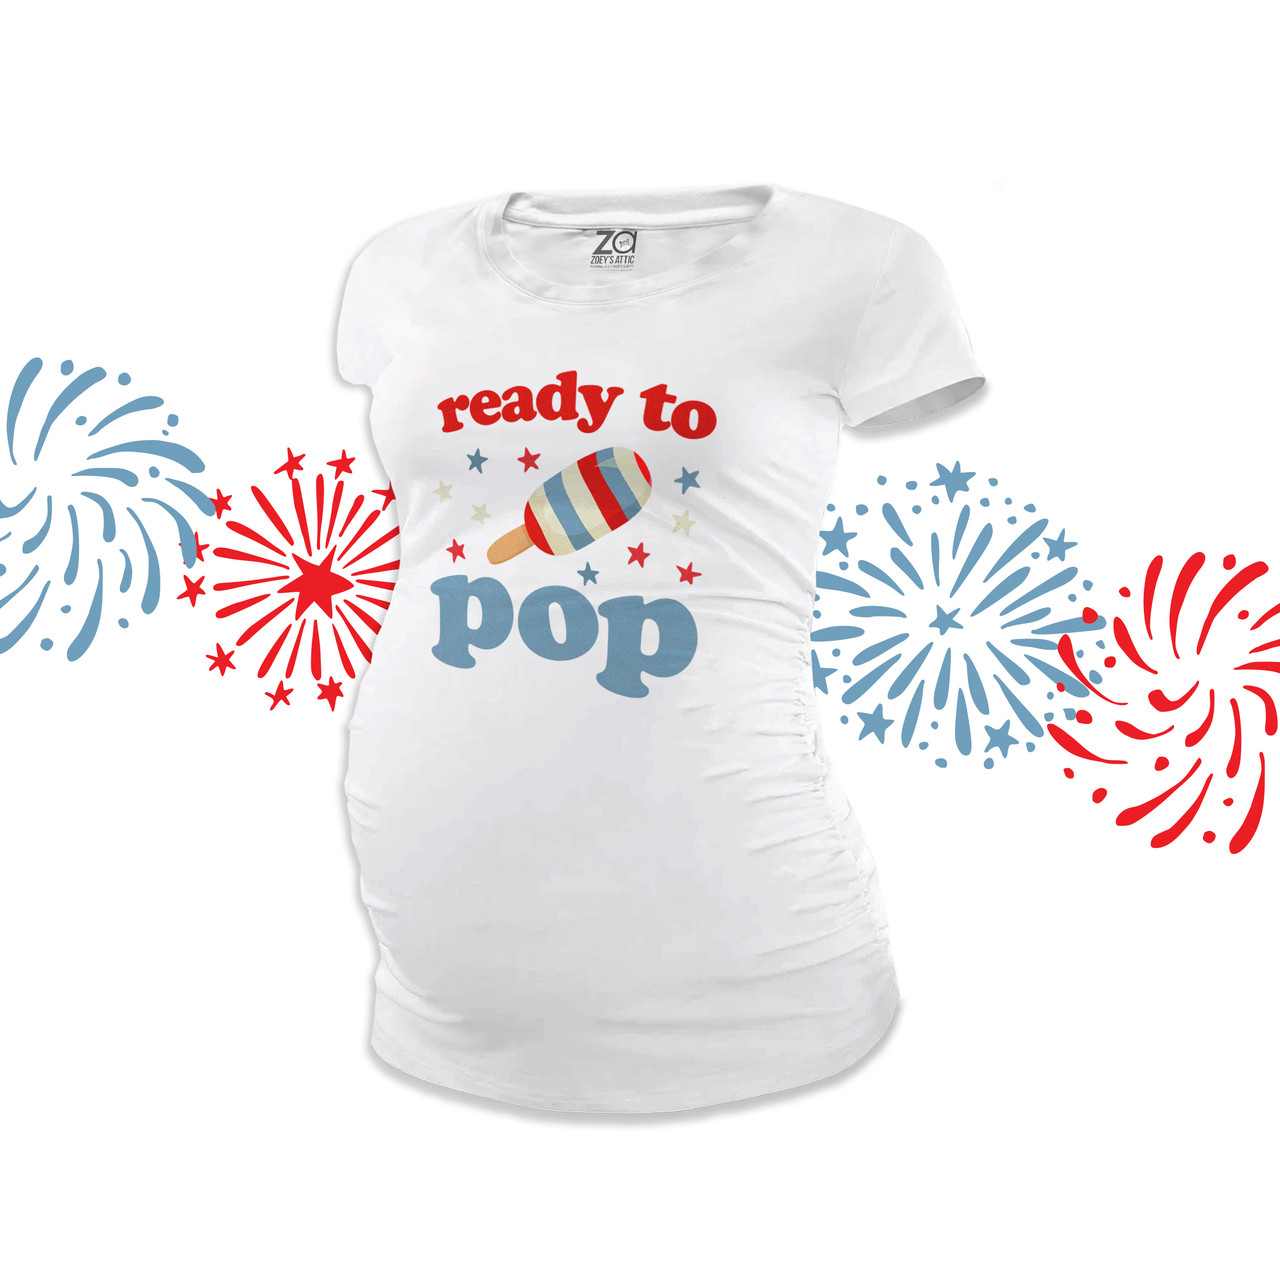 Zoey's Attic July 4th Red White and Blue Ready to Pop non-maternity or Maternity Tshirt